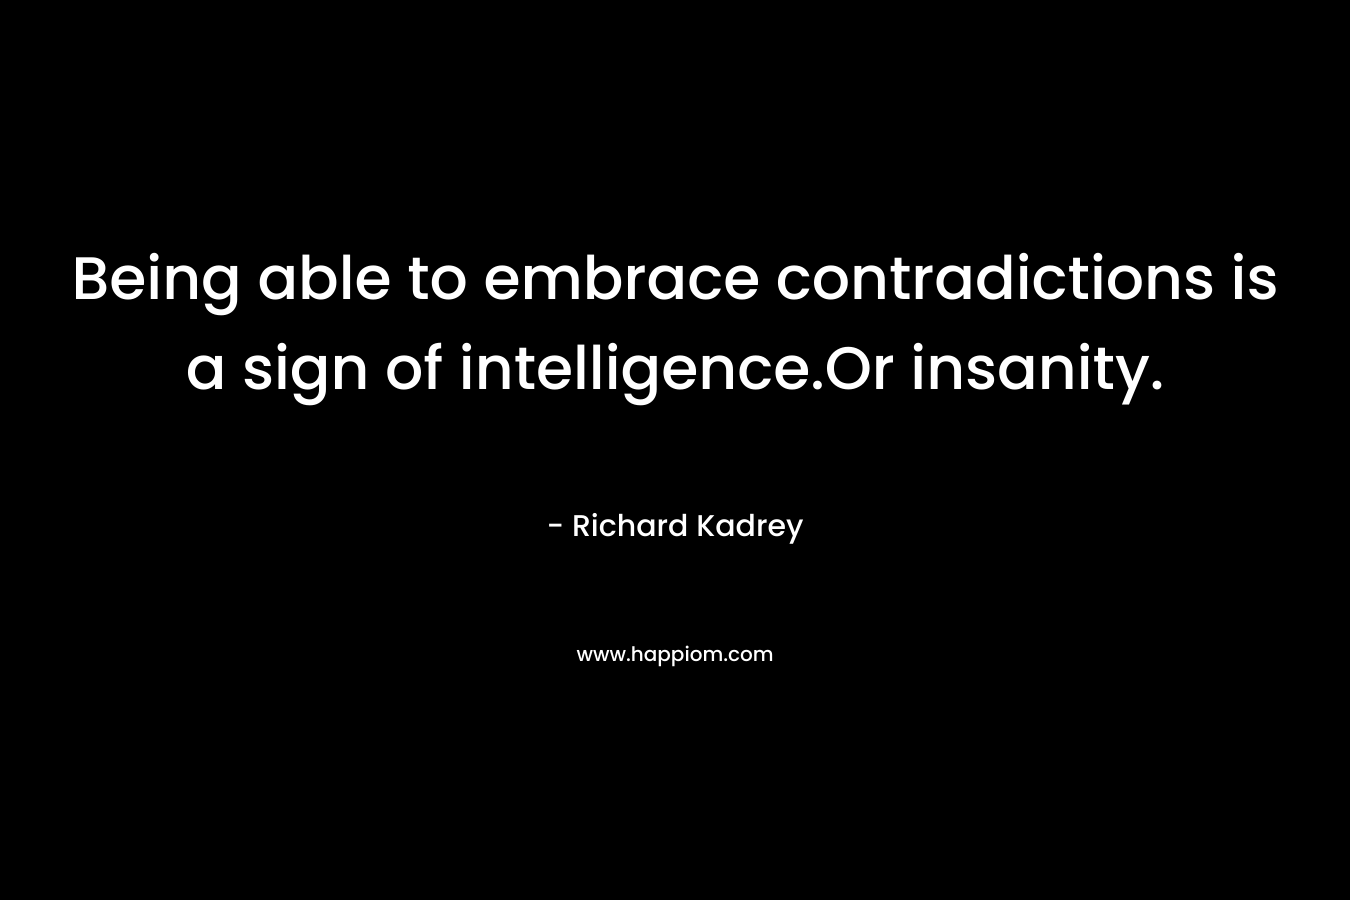 Being able to embrace contradictions is a sign of intelligence.Or insanity.